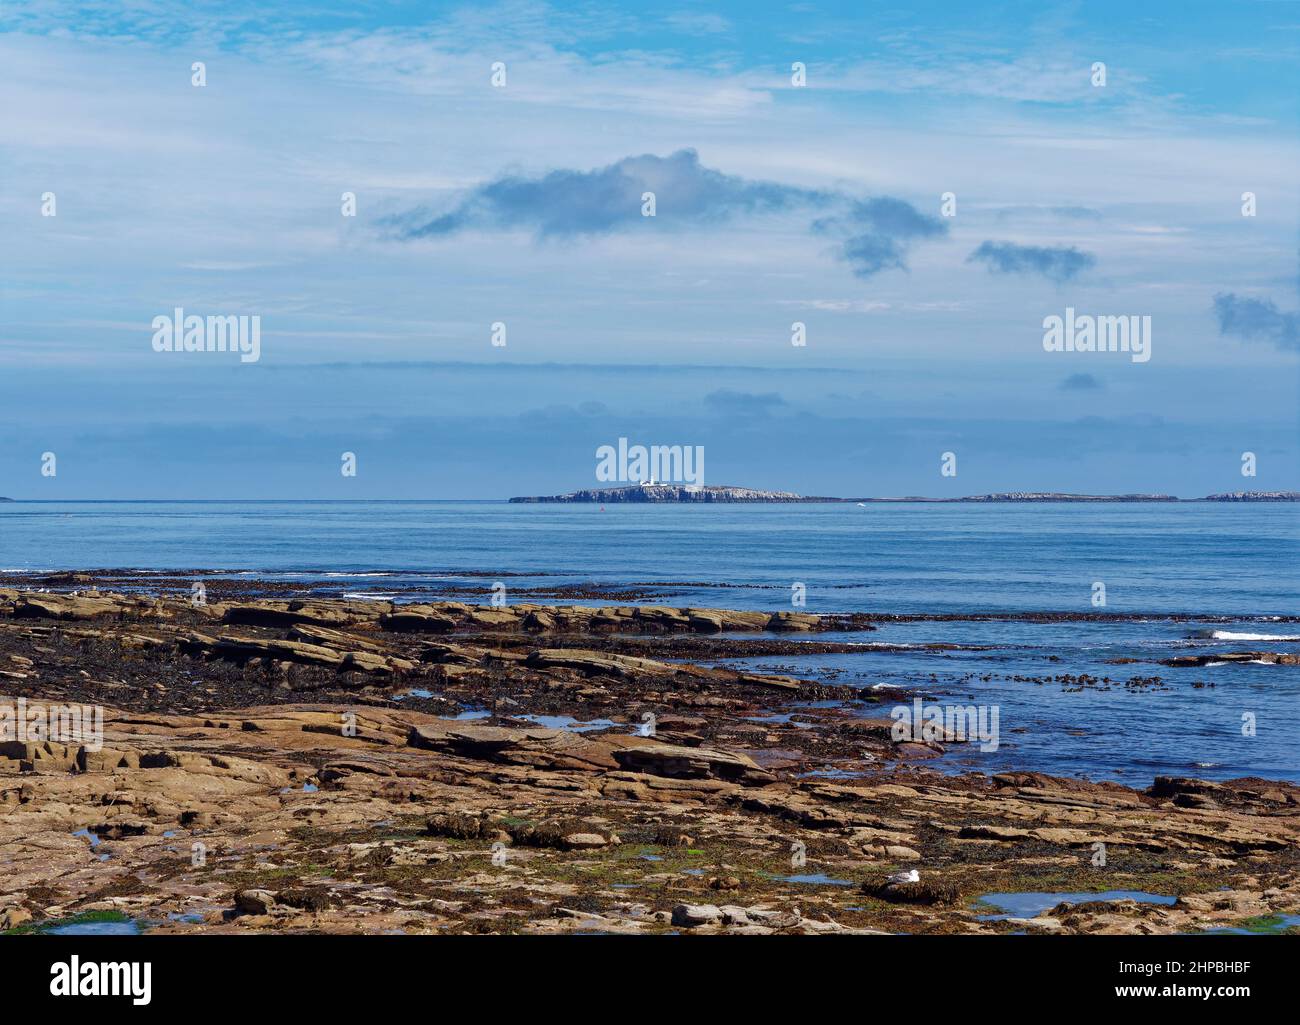 The View across the Tumbler Rocks at Low Tide at Seahouses and across to the Inner Farne Islands and its lighthouse. Stock Photo